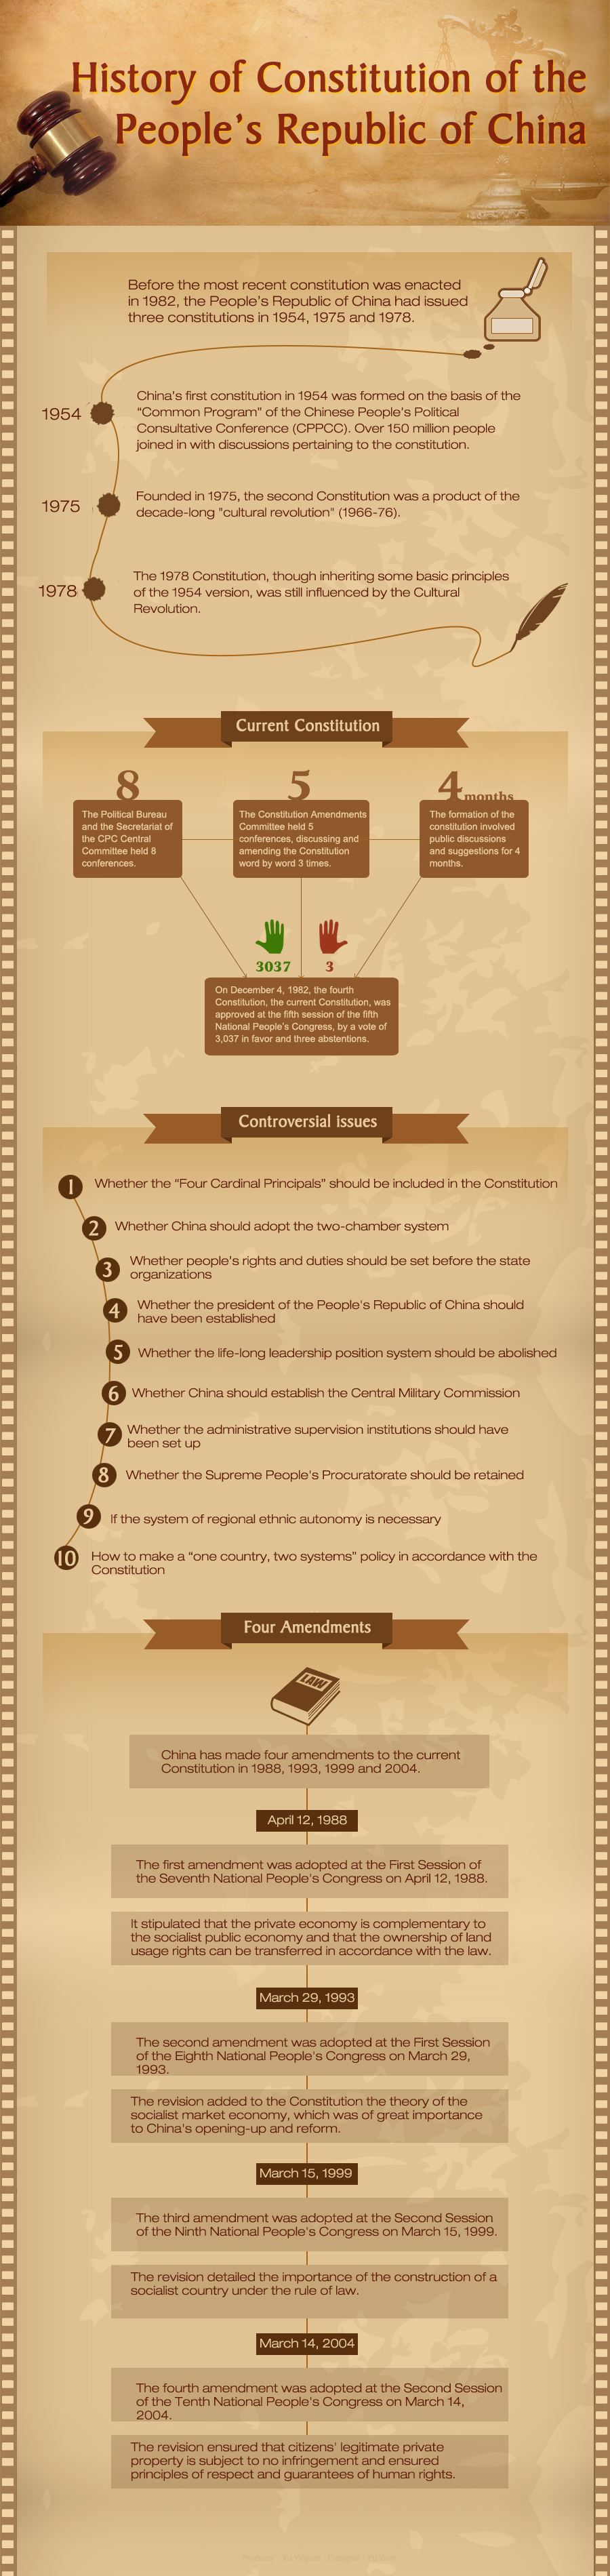 History of Constitution of the People's Republic of China